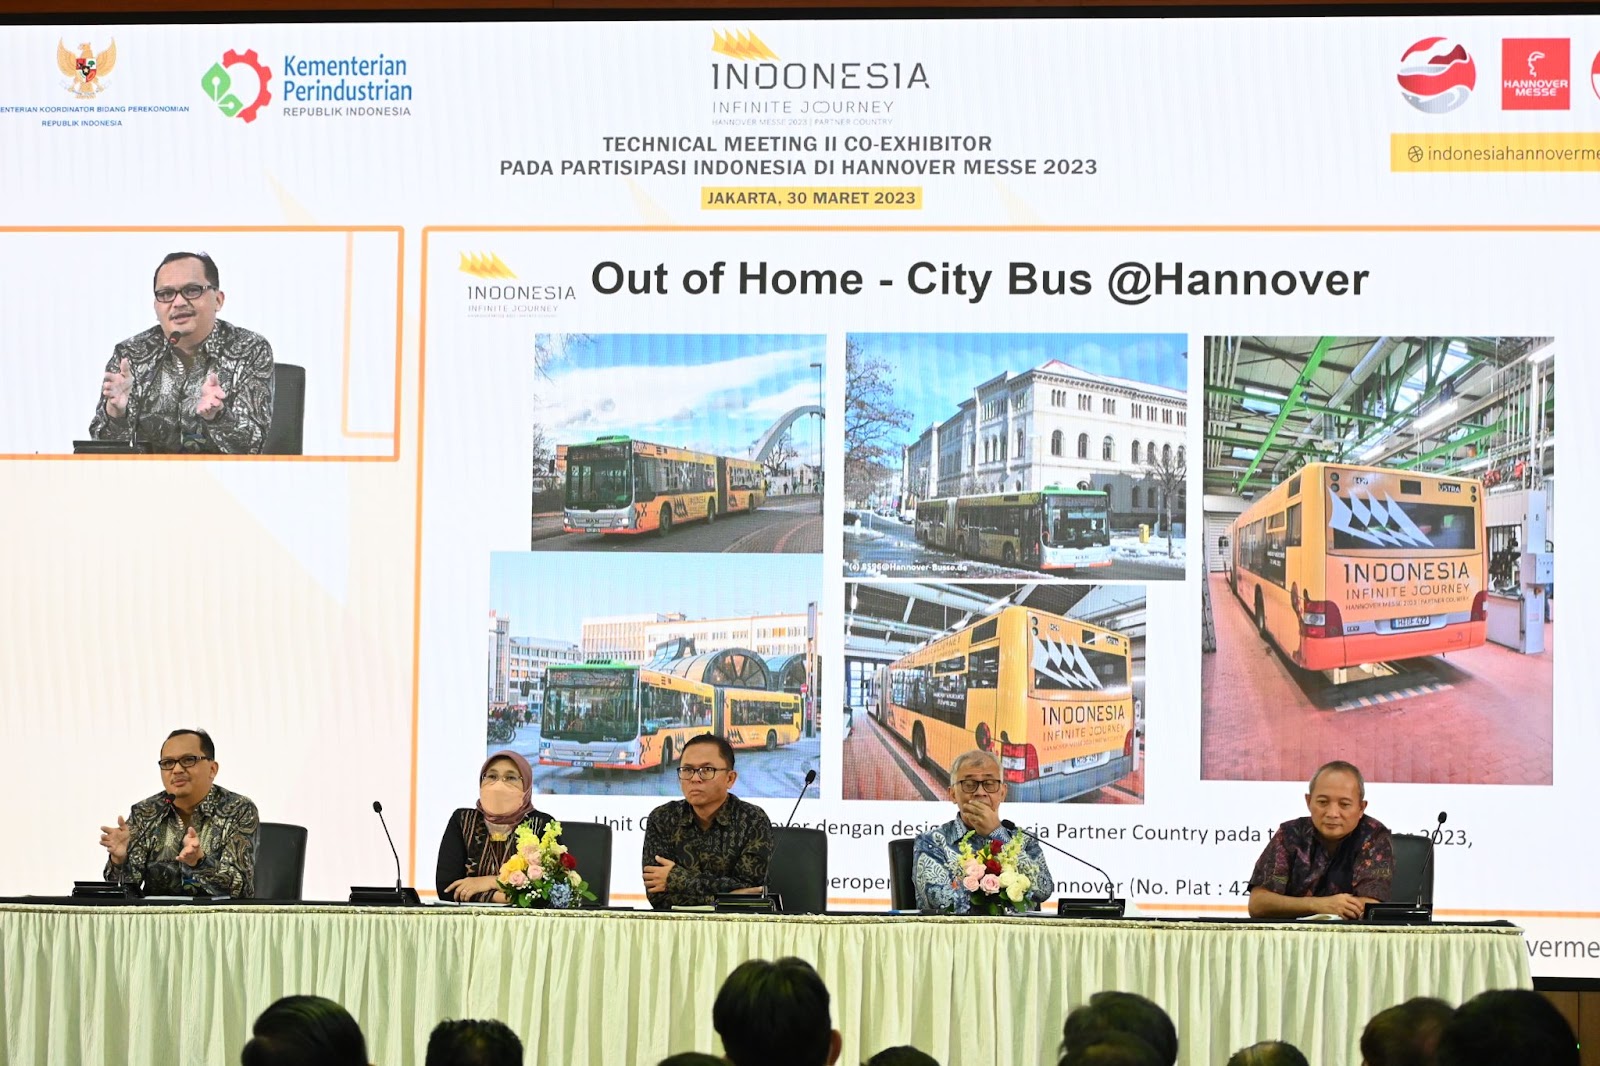 Opportunities and Challenges for the Indonesian Industry at the Hannover Messe 2023